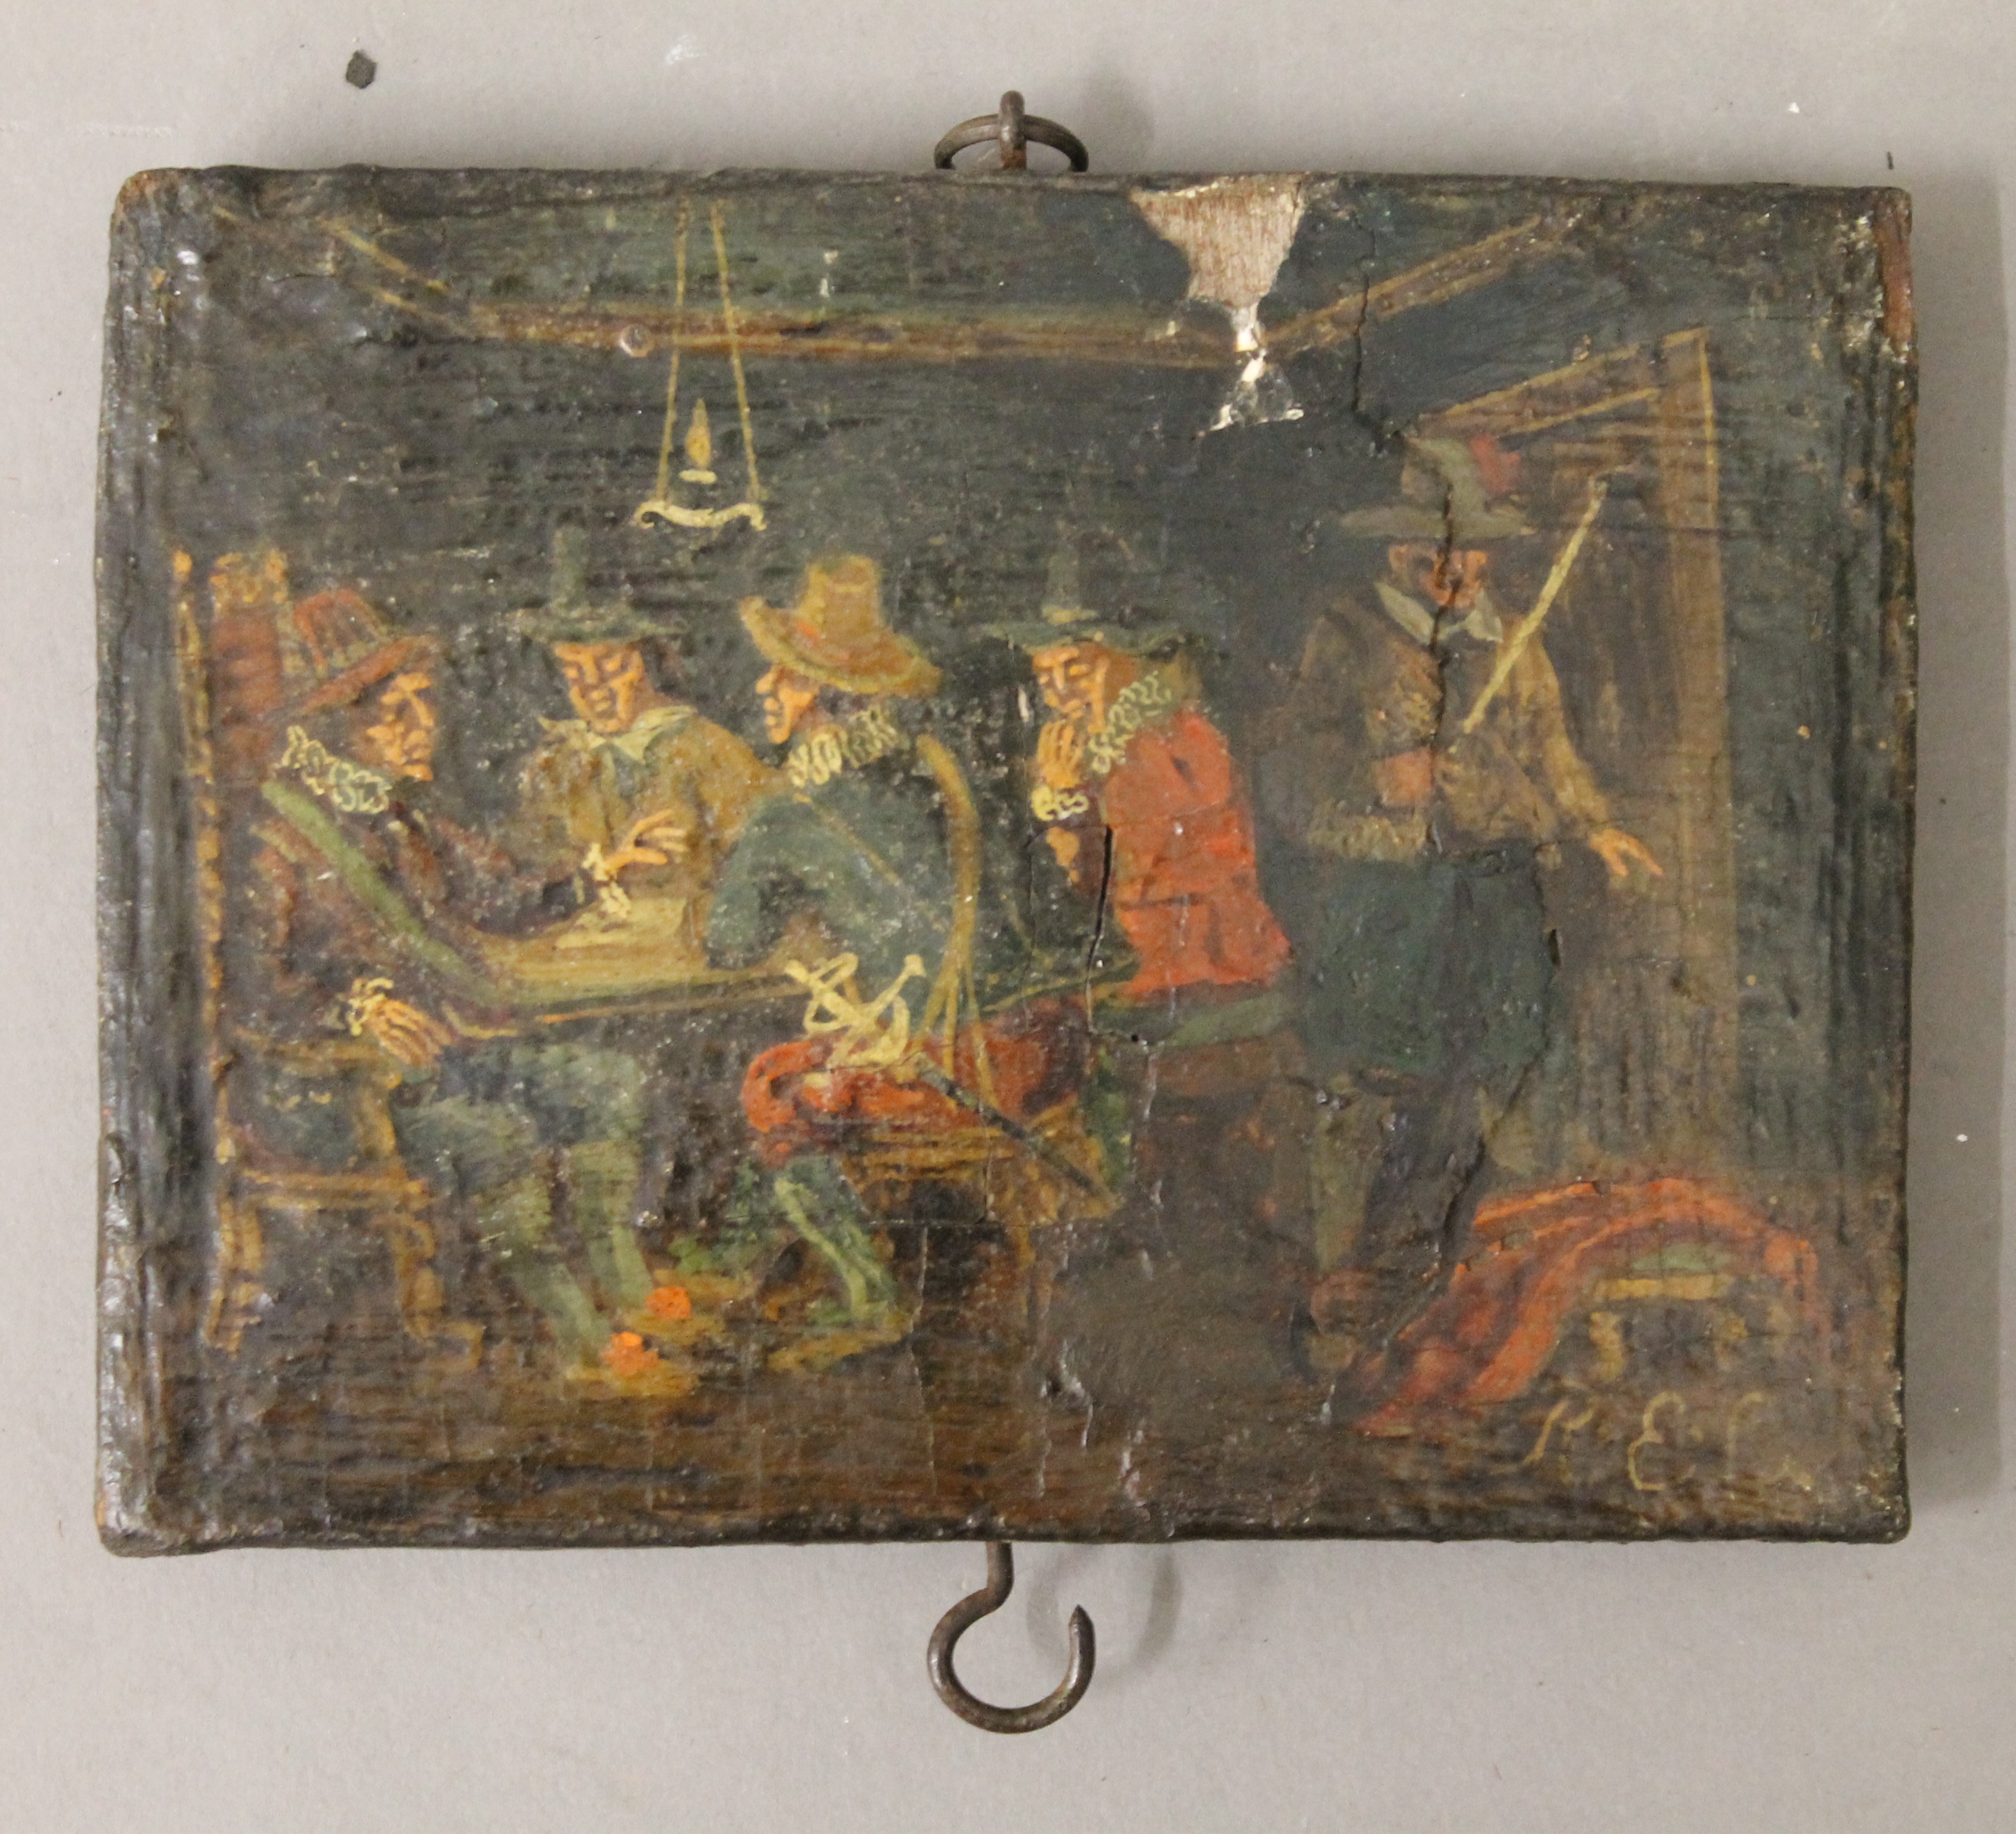 A collection of 18th/19th century miniature paintings on panel, initialled R.E.L. - Image 9 of 10